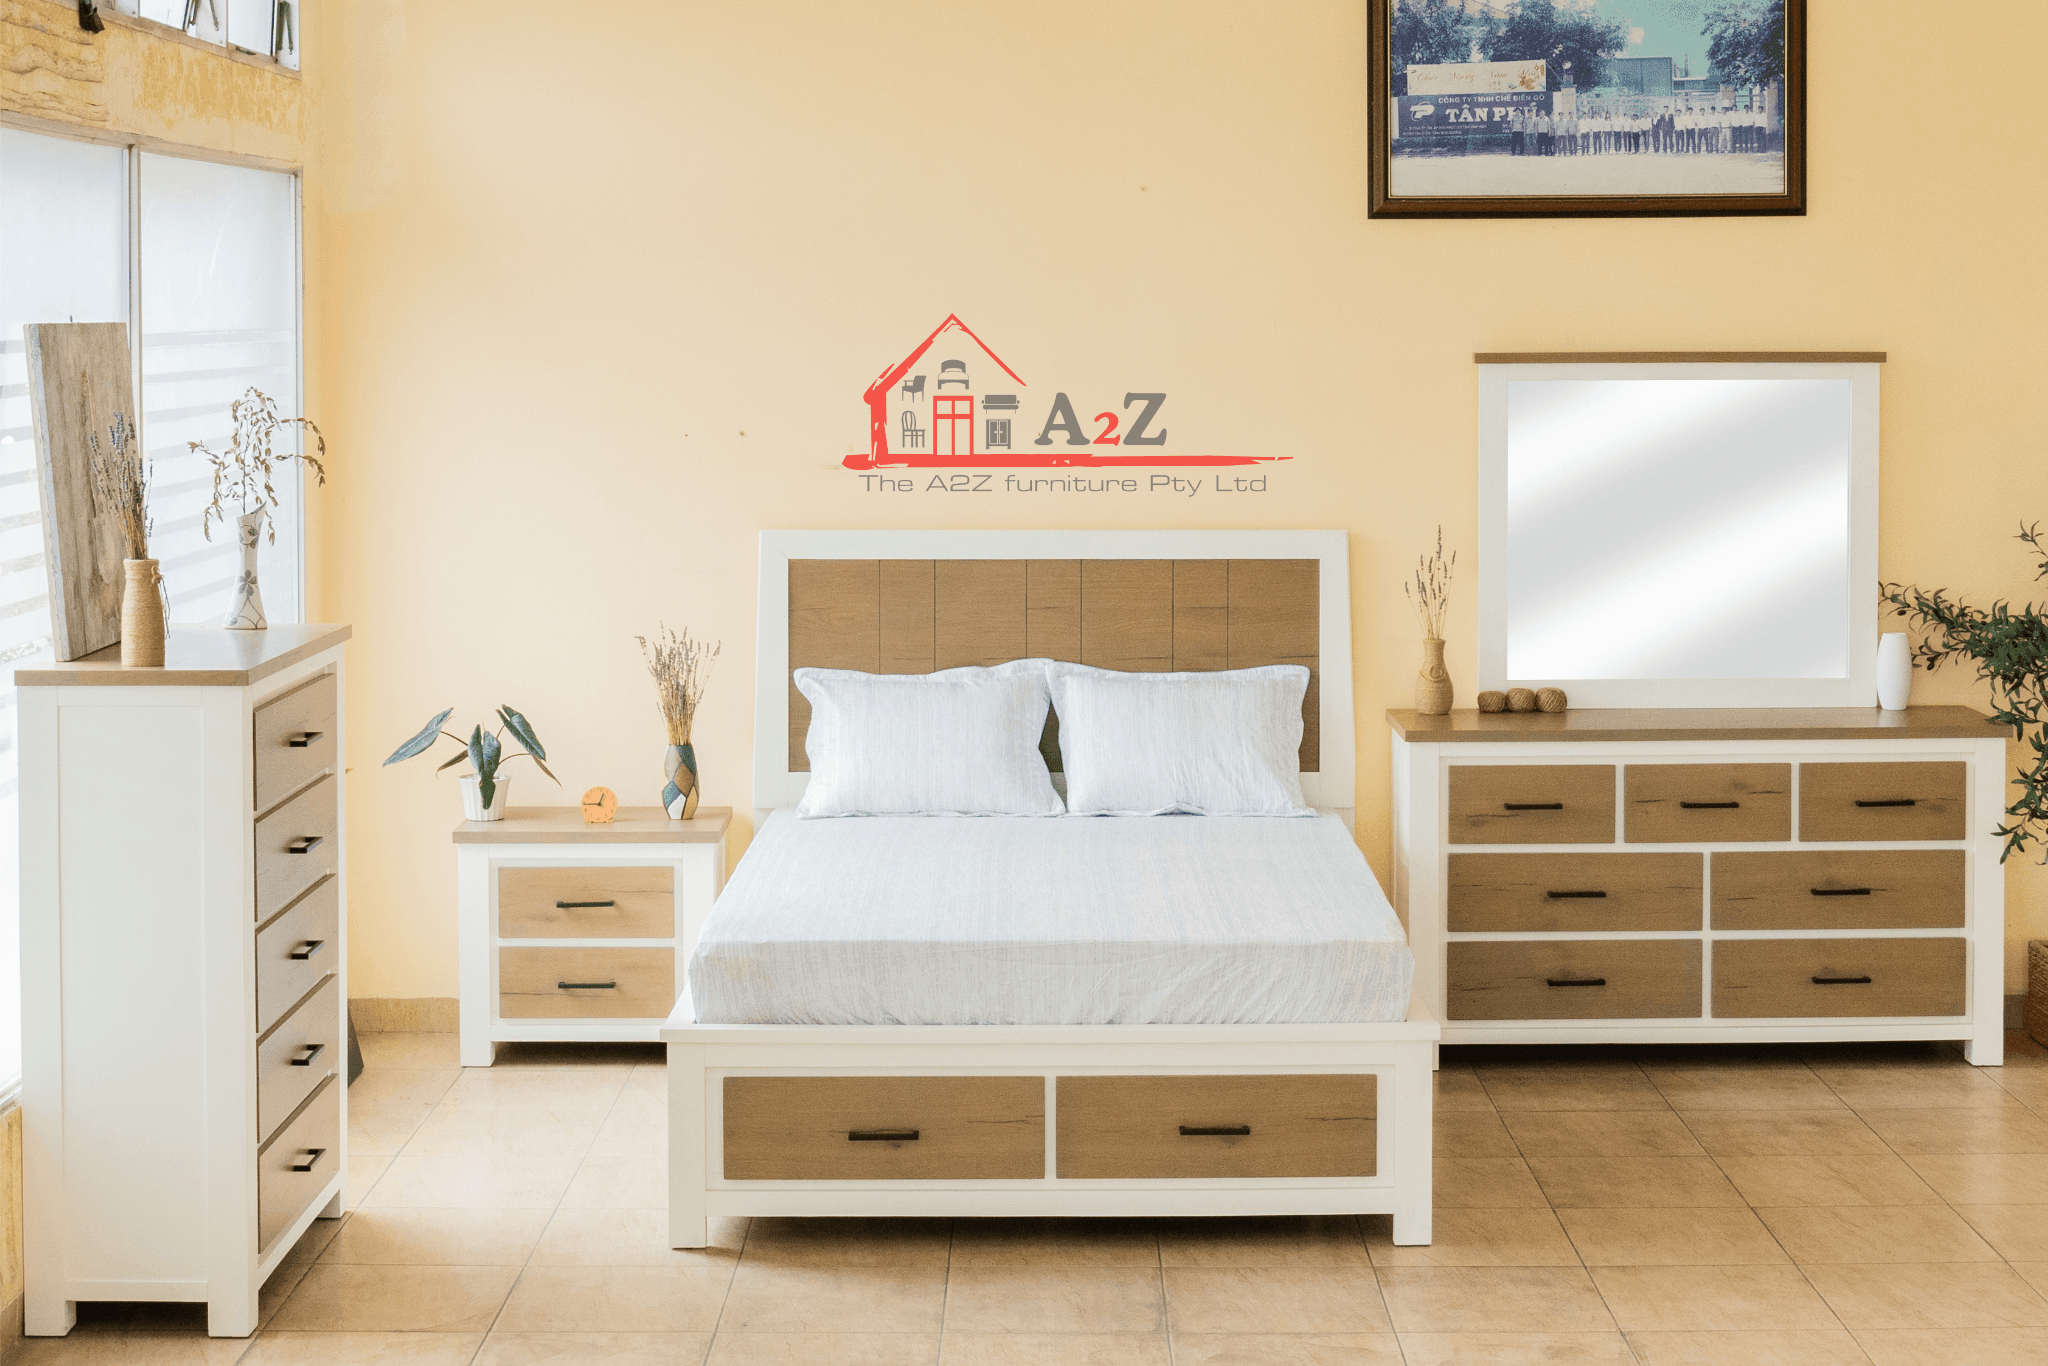 Image of Jade Bed - a solid acacia wooden bed frame with dual-tone off-white and brown colour and two storage drawers in the front - The A2Z Furniture